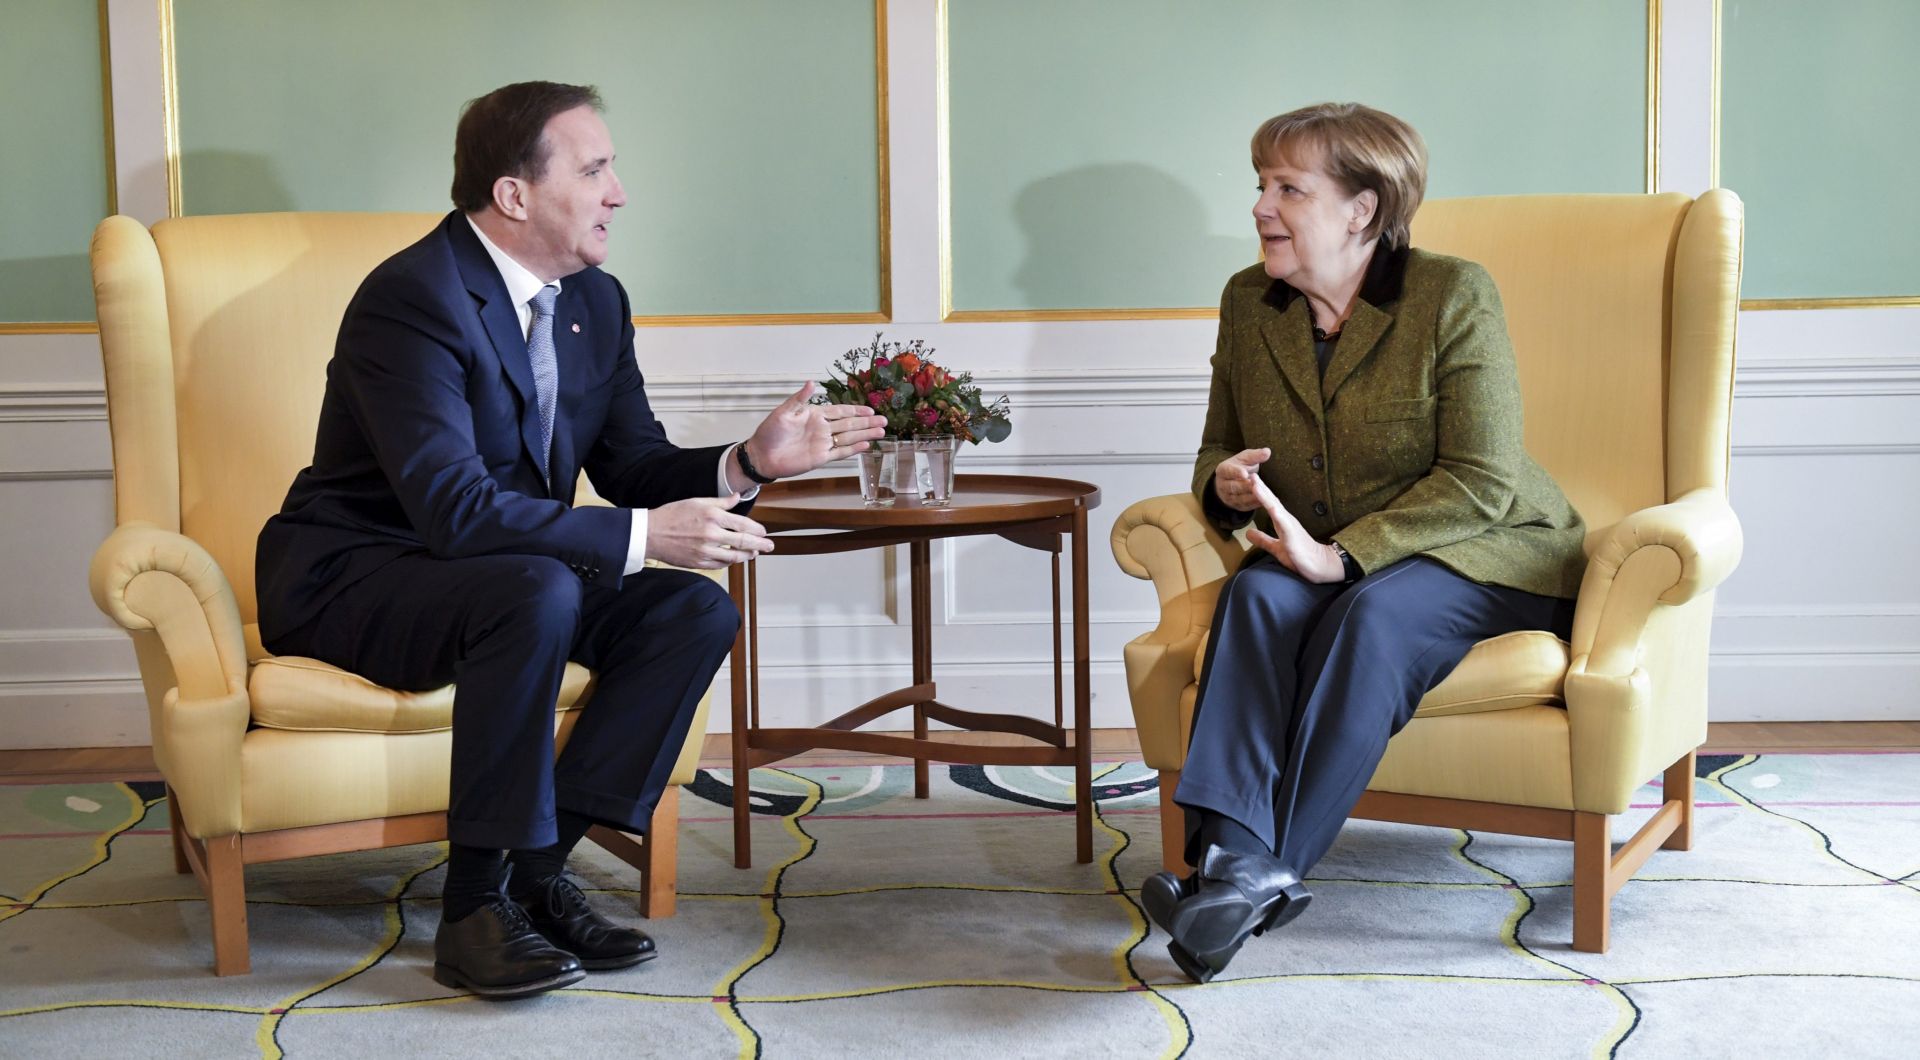 epa05762693 German Chancellor Angela Merkel (R) meets with Swedish Prime Minister Stefan Lofven (L) at the government headquarters Rosenbad in Stockholm, Sweden, 31 January 2017. Merkel earlier the same day arrived for a one-day official visit to Sweden for bilateral talks.  EPA/HENRIK MONTGOMERY SWEDEN OUT